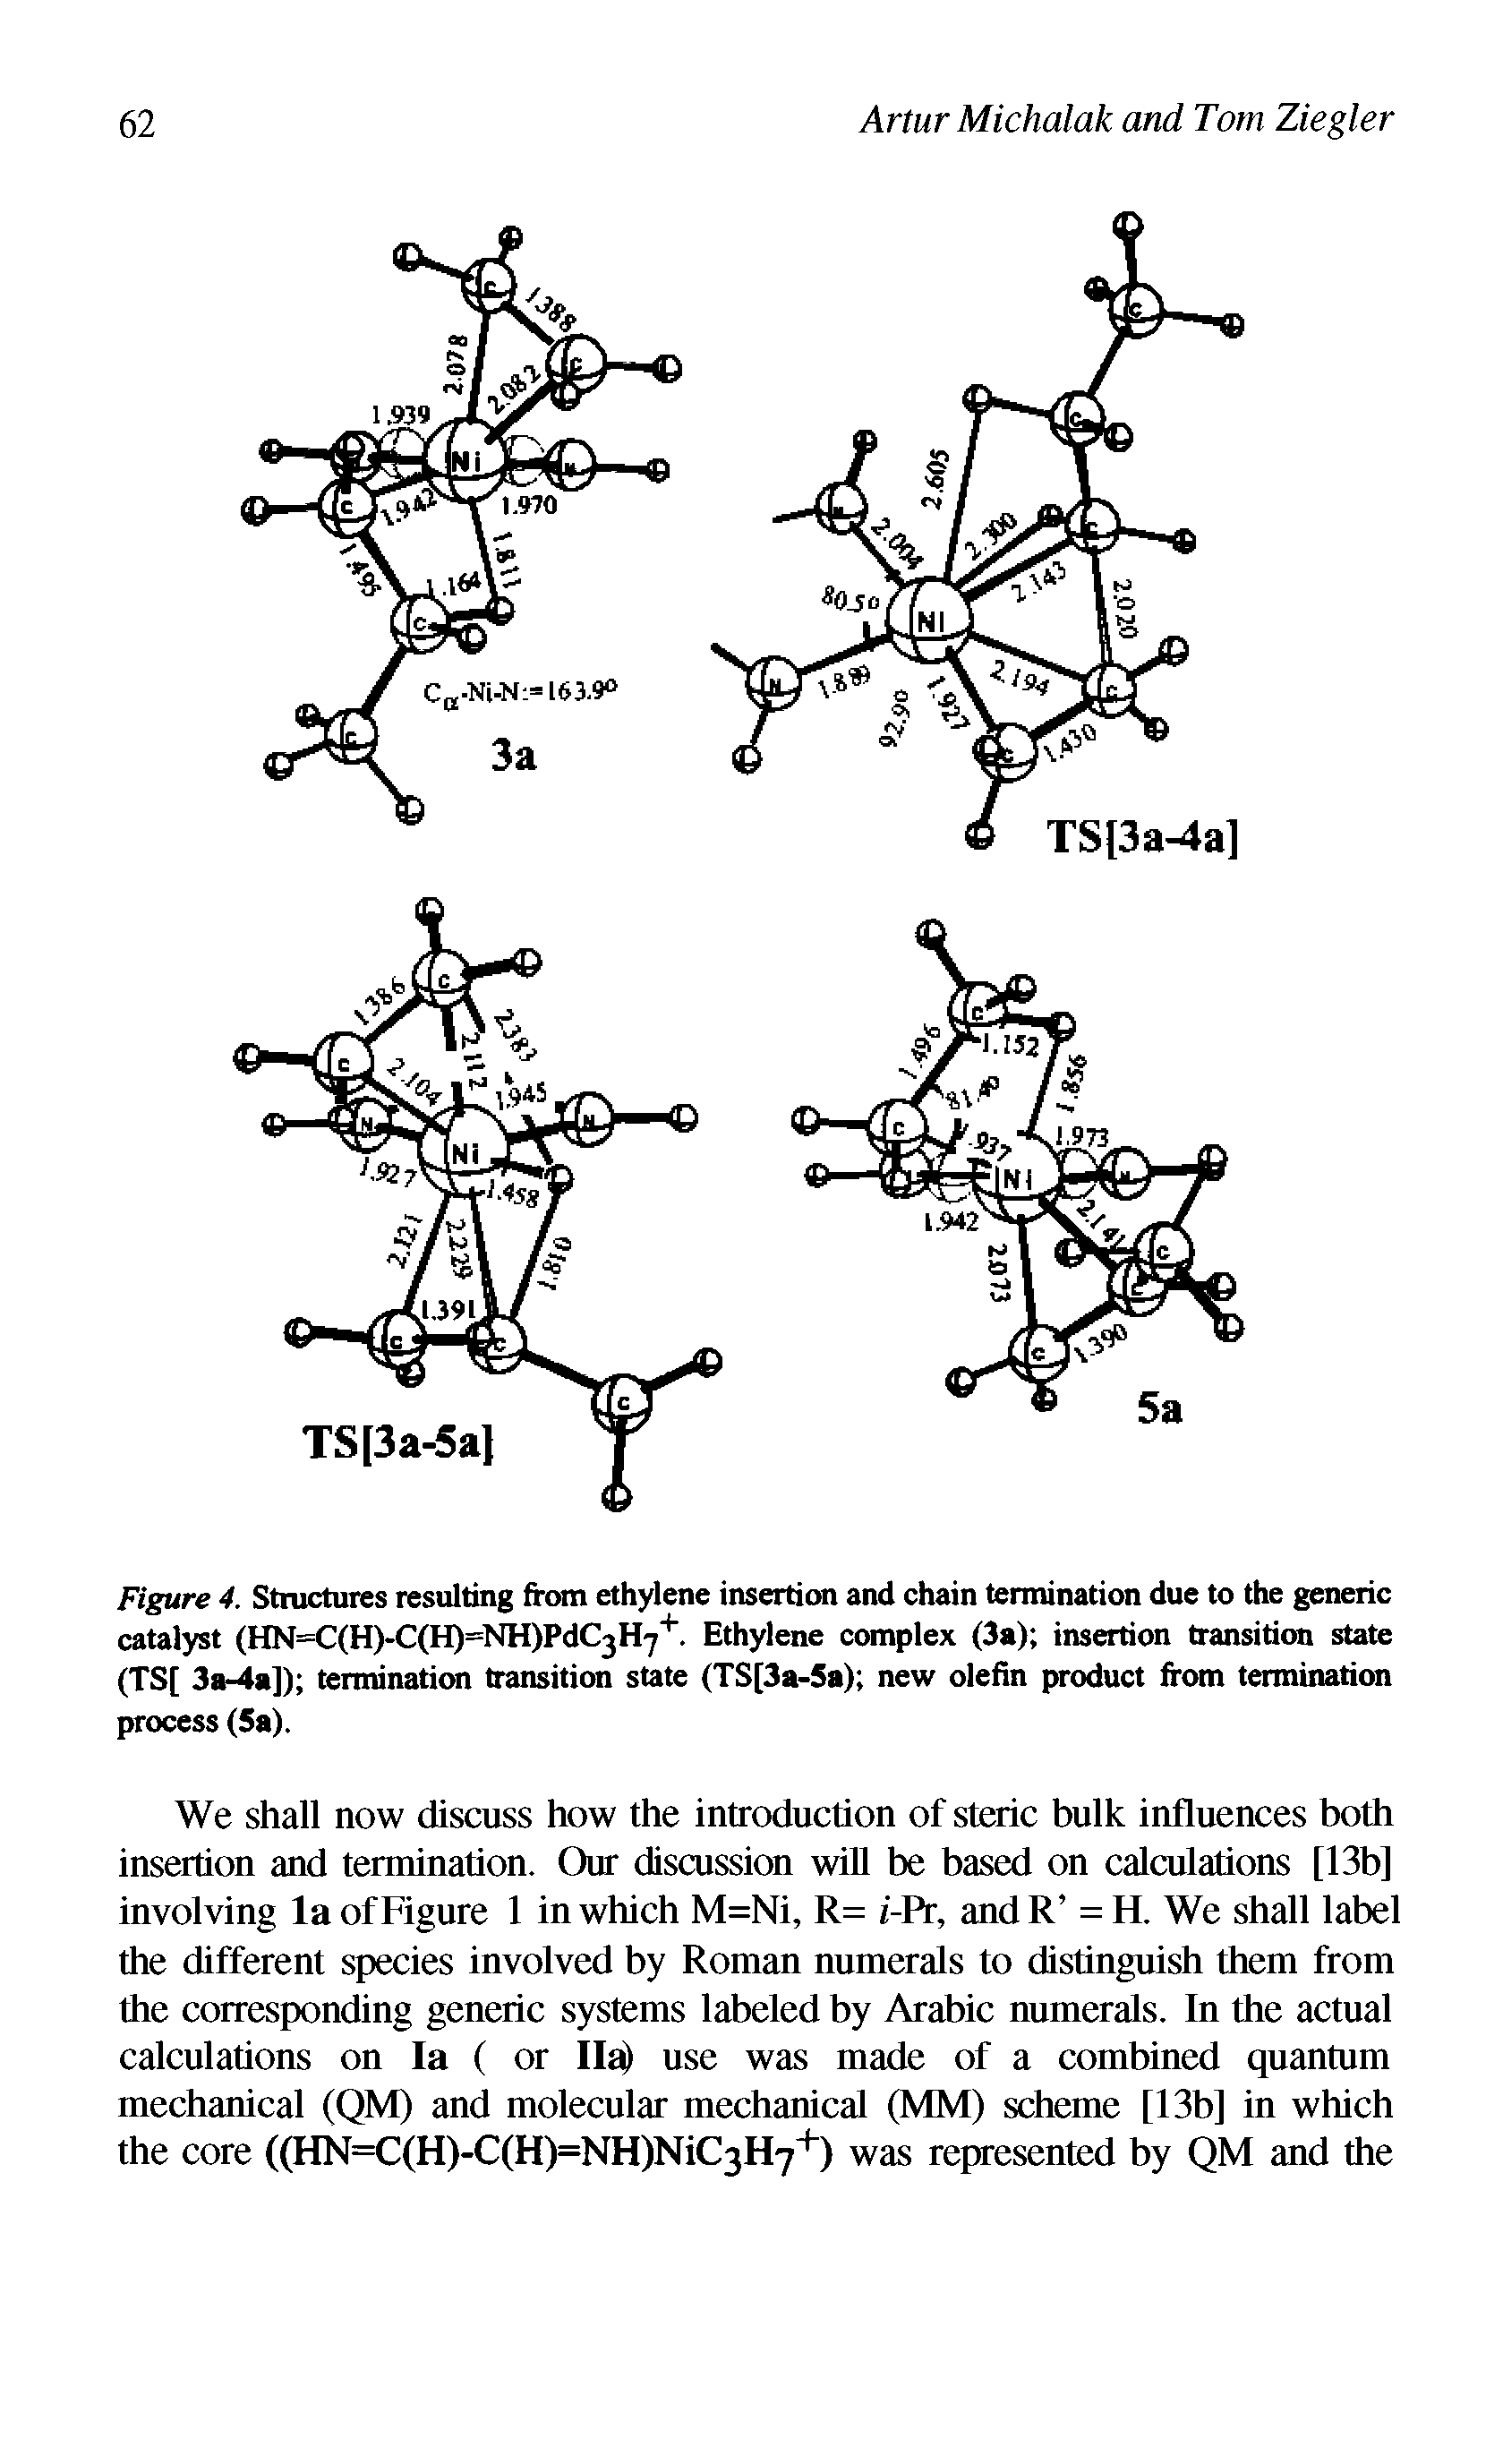 Figure 4. Structures resulting from ethylene insertion and chain termination due to the generic catalyst (HN=C(H)-C(H)=NH)PdC3H7+. Ethylene complex (3a) insertion transition state (TS[ 3a-4a]) termination transition state (TS[3a-5a) new olefin product from termination process (5a).